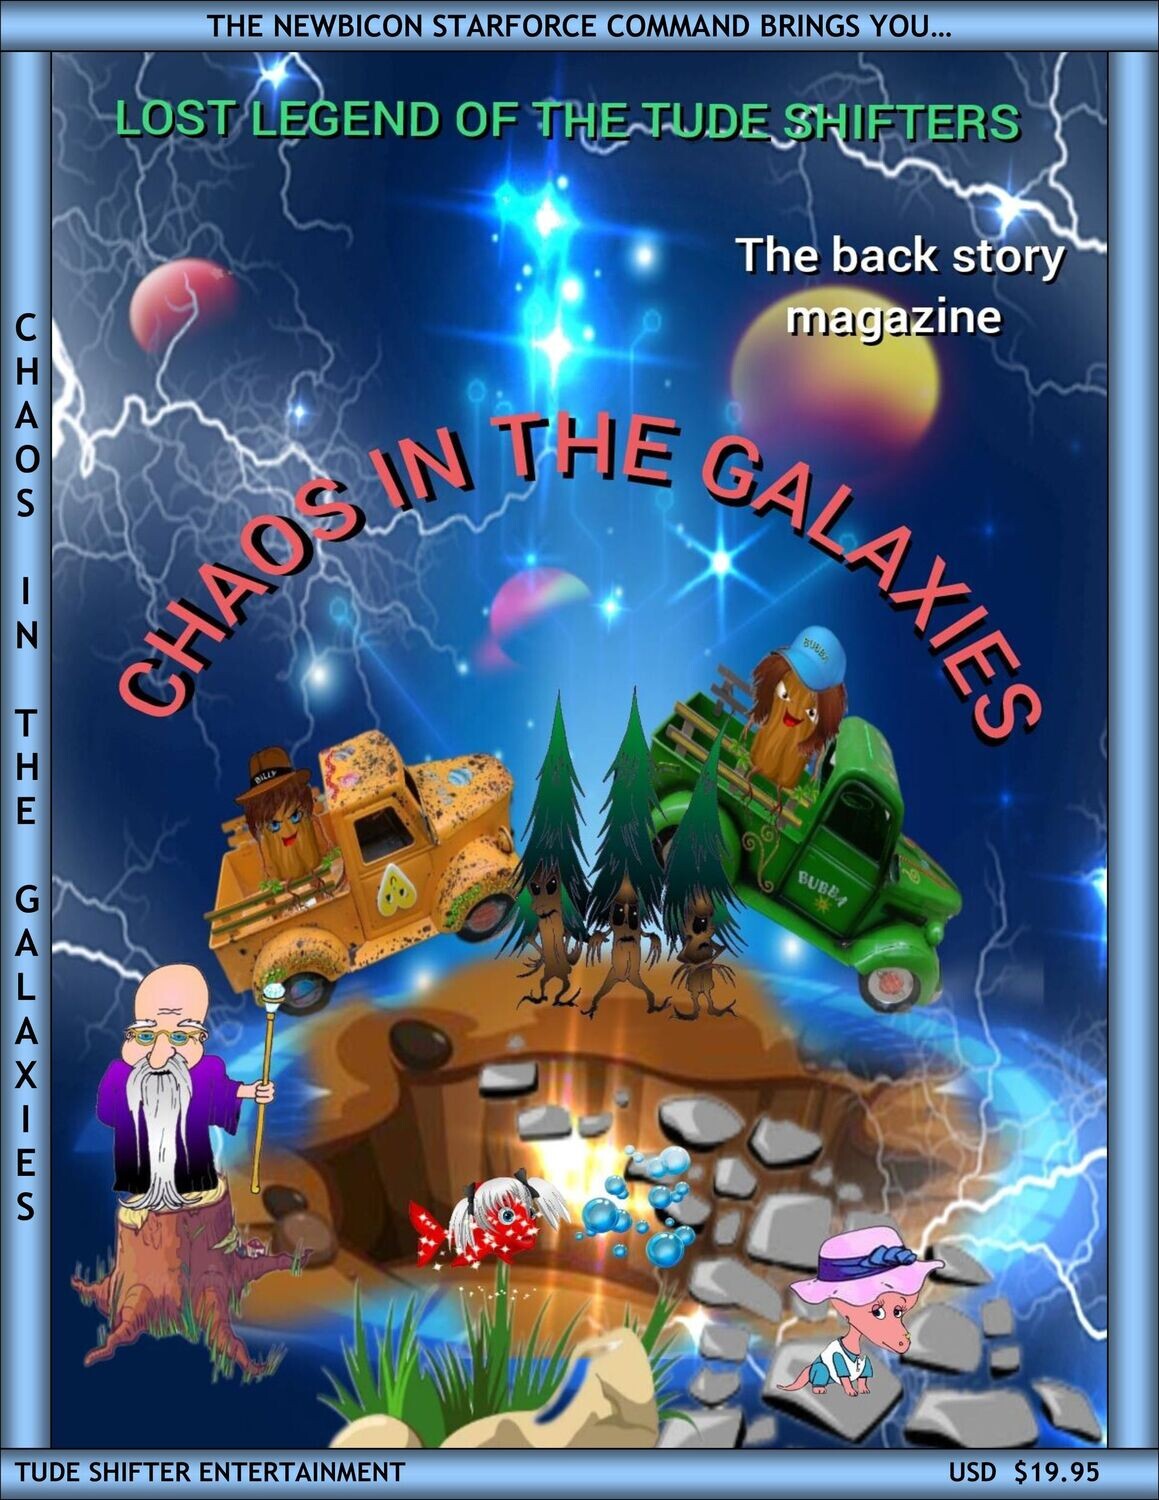 Lost Legend of the Tude Shifters"Chaos in the Galaxies" ebook